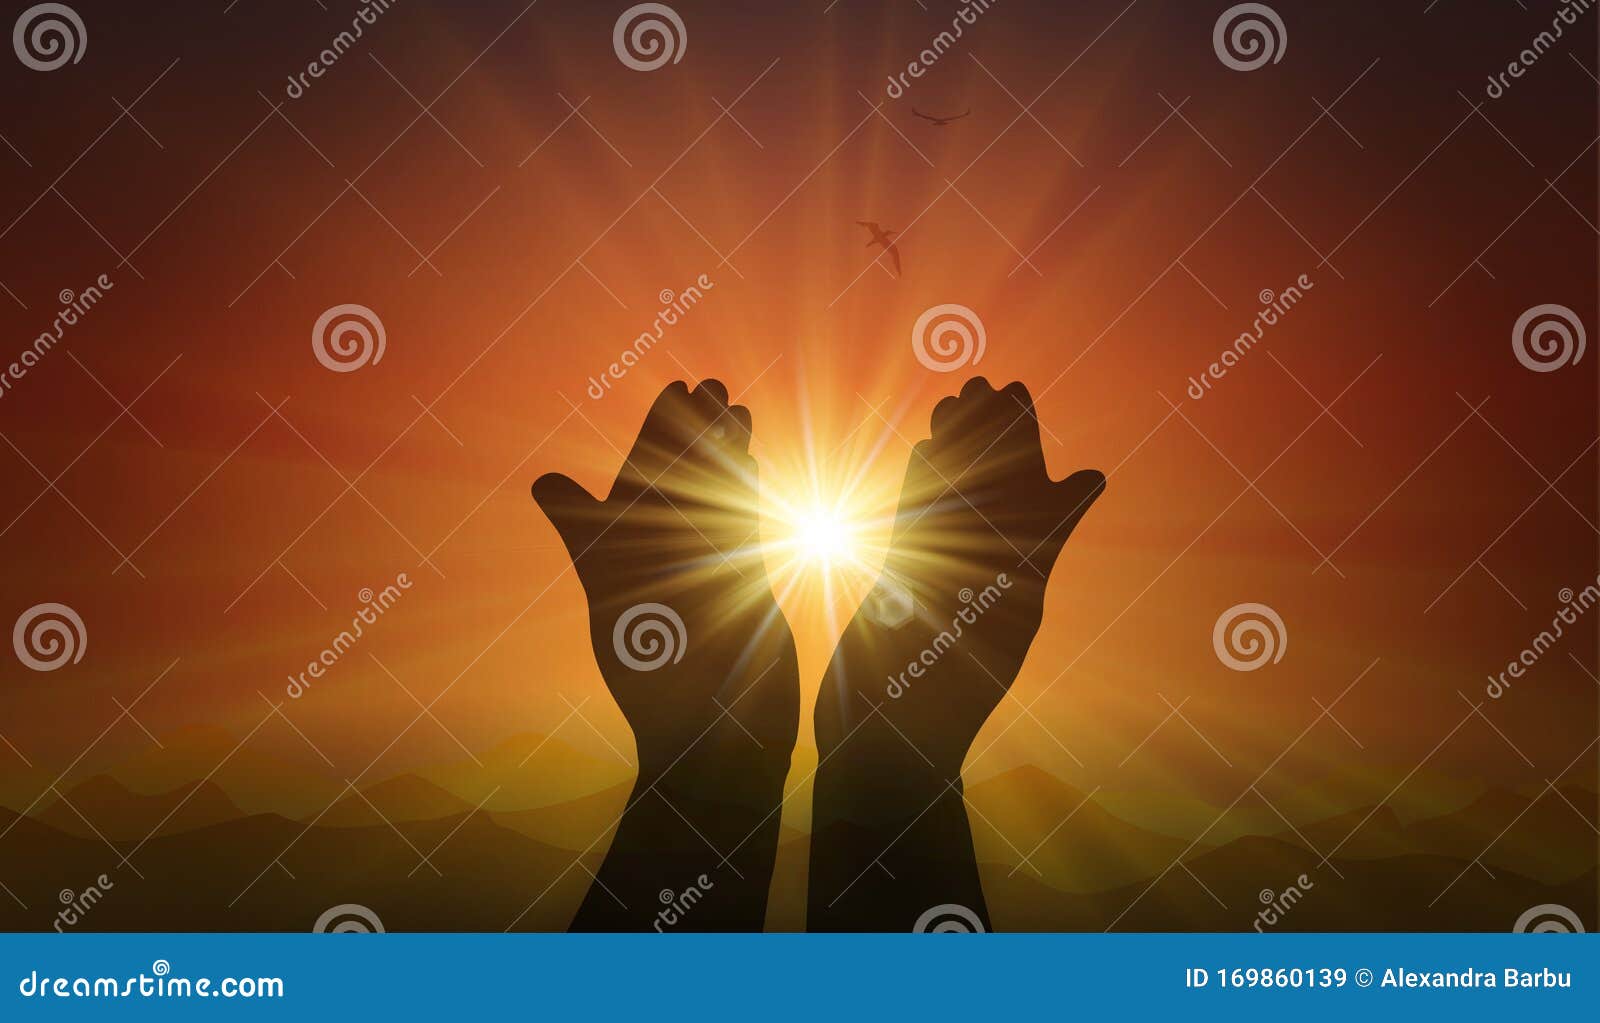 hands with spark of hope, the light of faith, orange sunset background